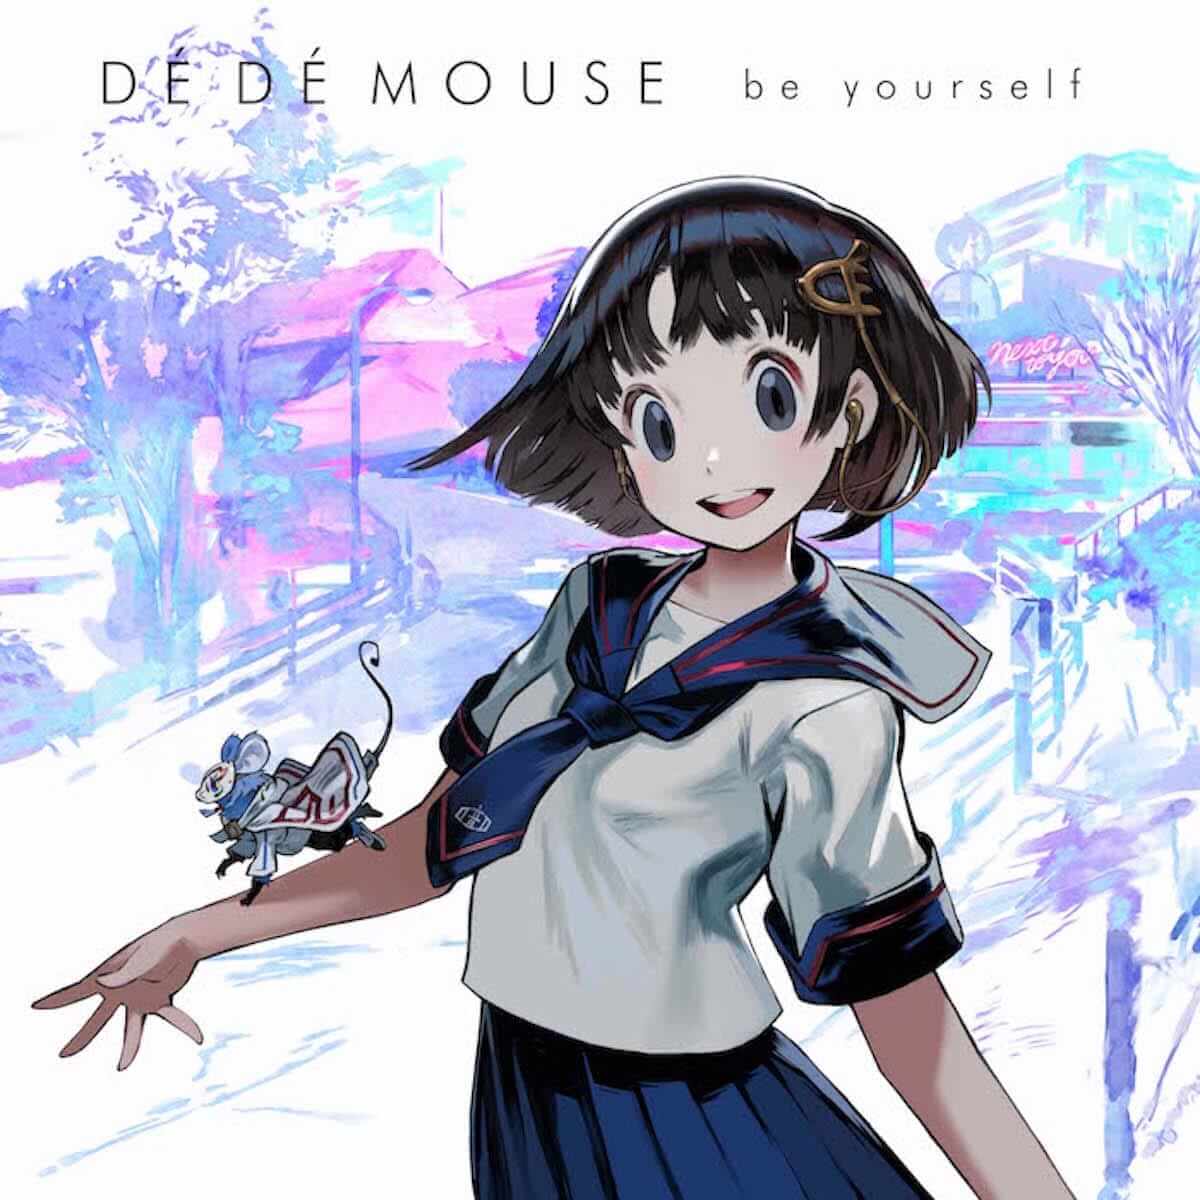 DÉ DÉ MOUSE、初映像作品がクラウドファンディングでリリース決定！ music180710_dedemouse_1-1200x1200